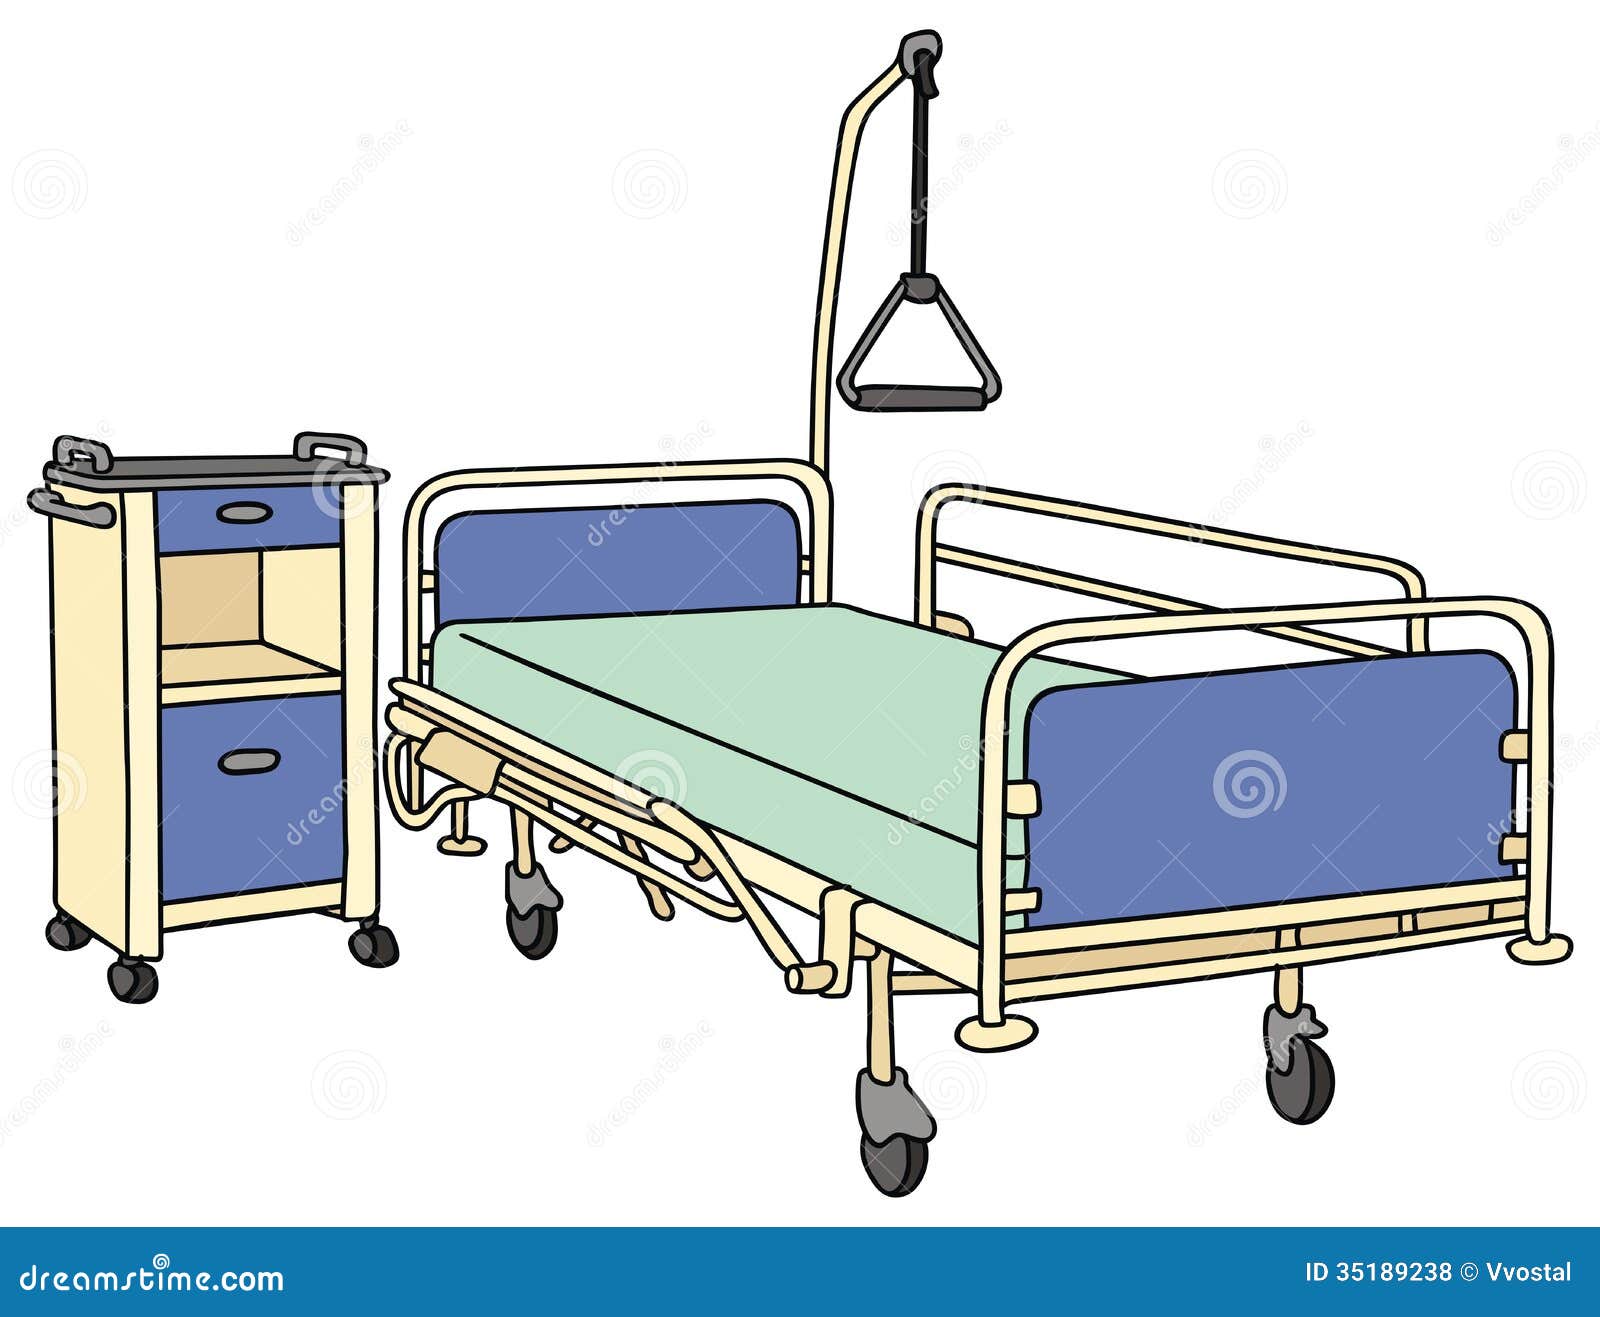 Empty Hospital Bed Clipart Hospital bed